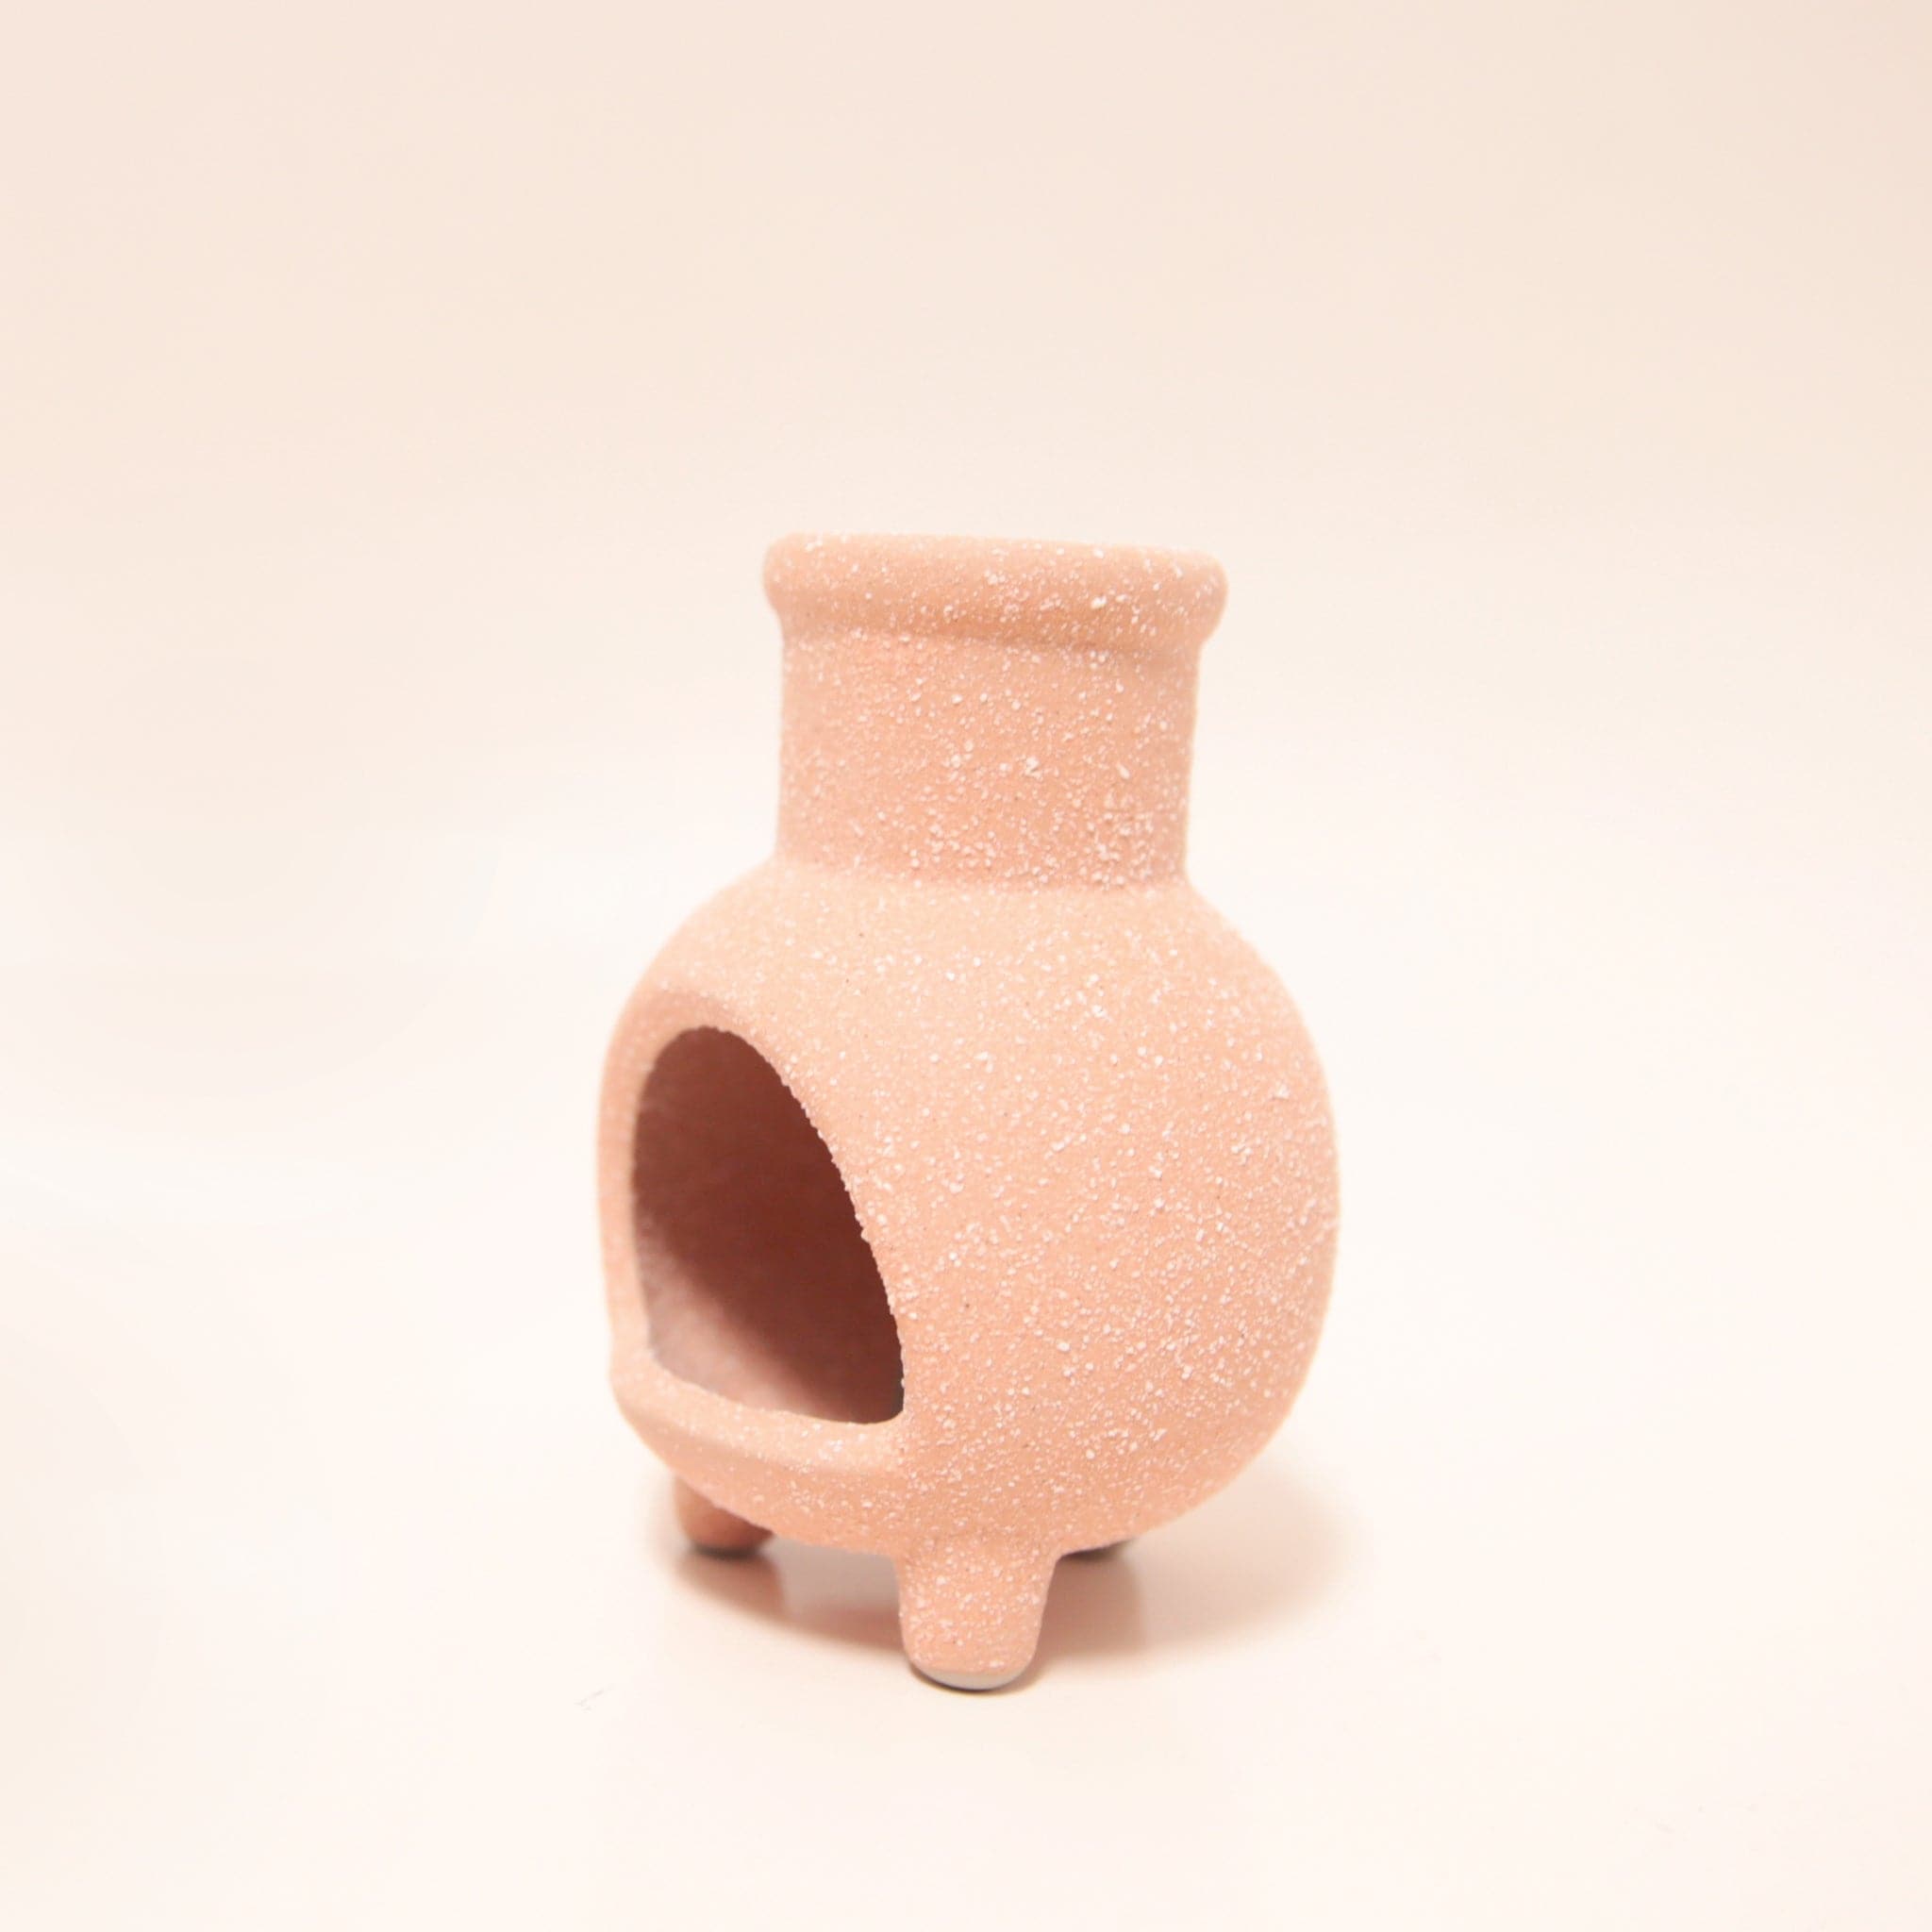 A tiny terracotta chiminea with legs and an opening for the incense cones to sit inside.